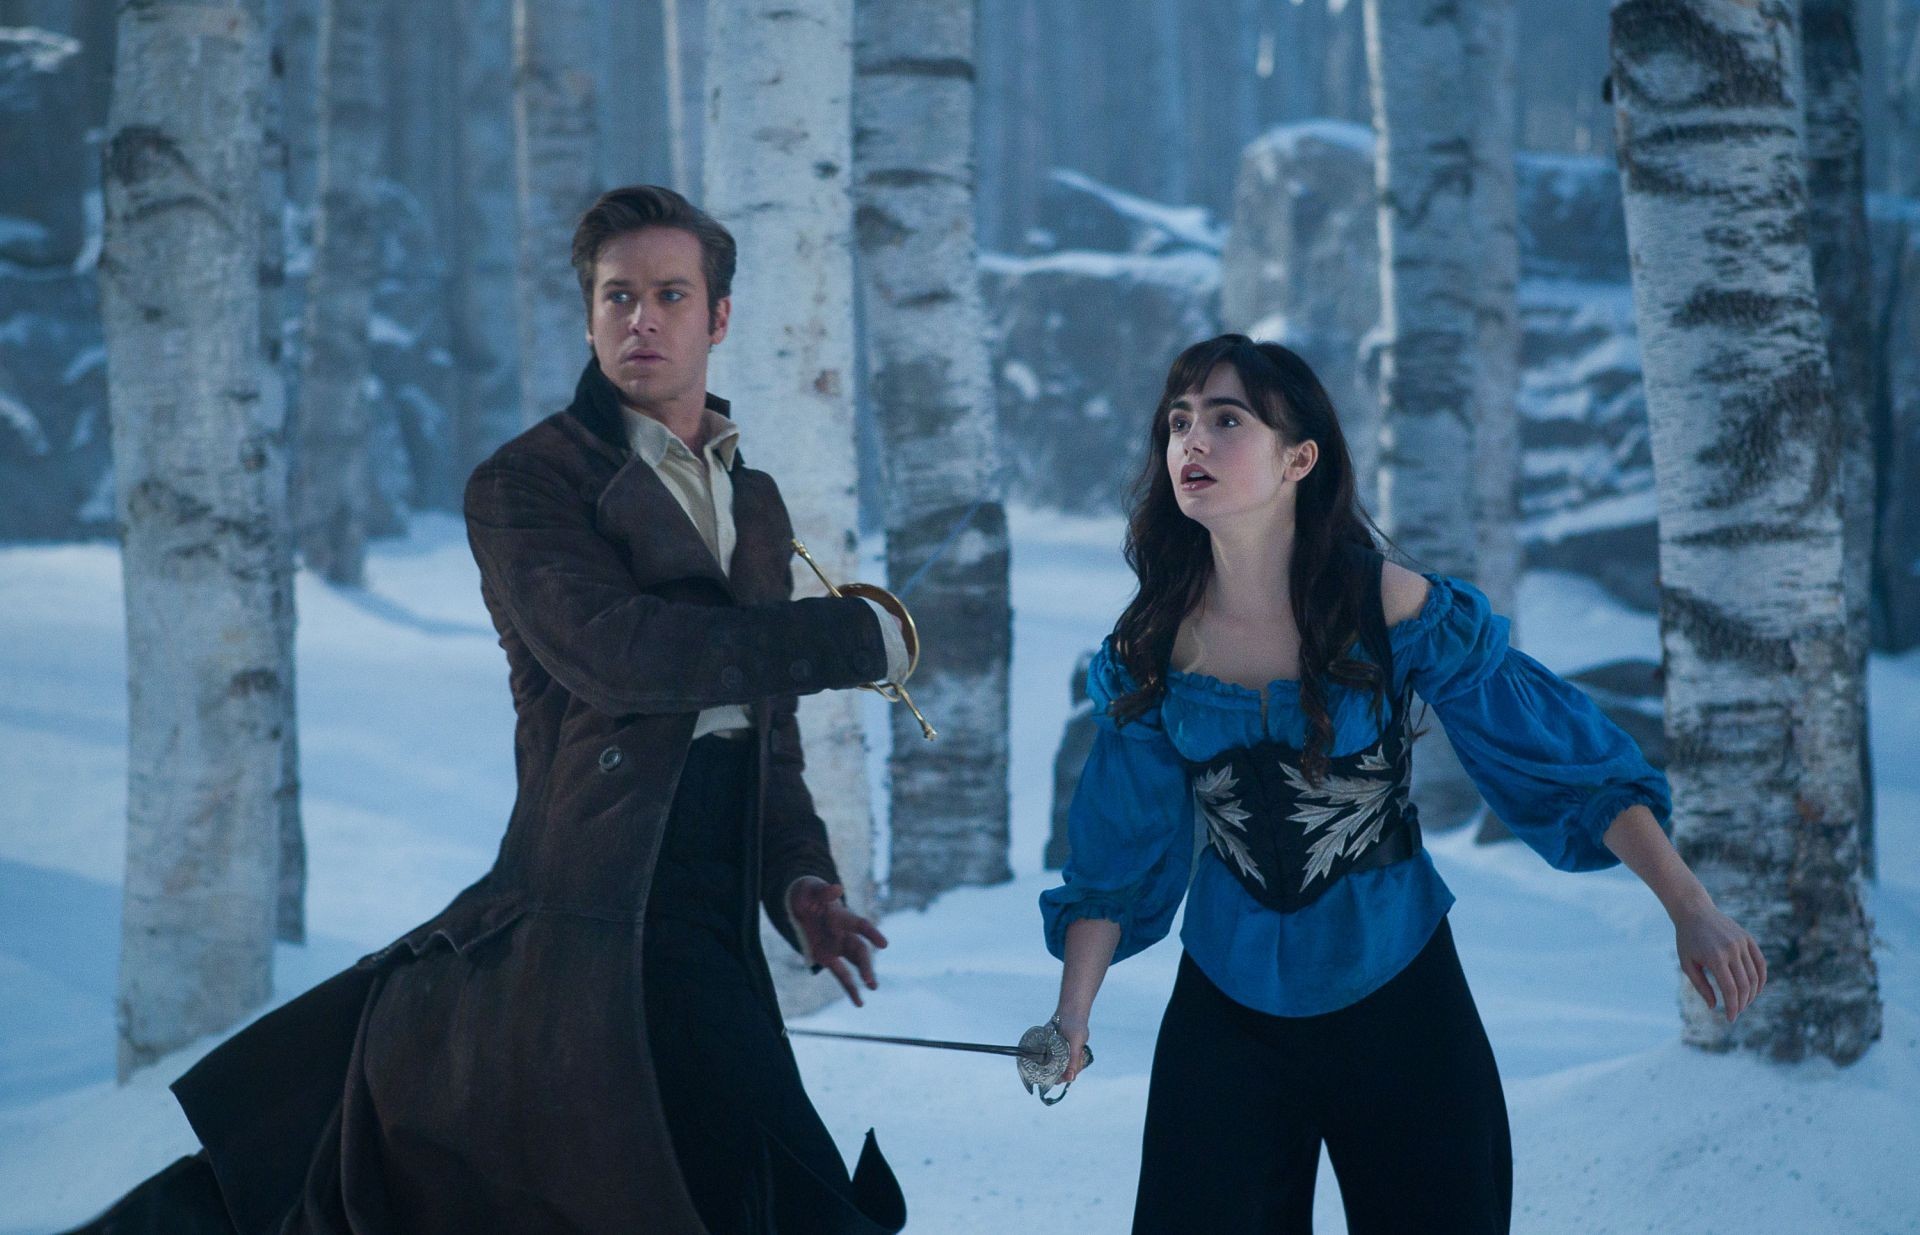 Armie Hammer stars as Prince Andrew Alcott and Lily Collins stars as Snow White in Relativity Media's Mirror Mirror (2012). Photo credit by Jan Thijs.